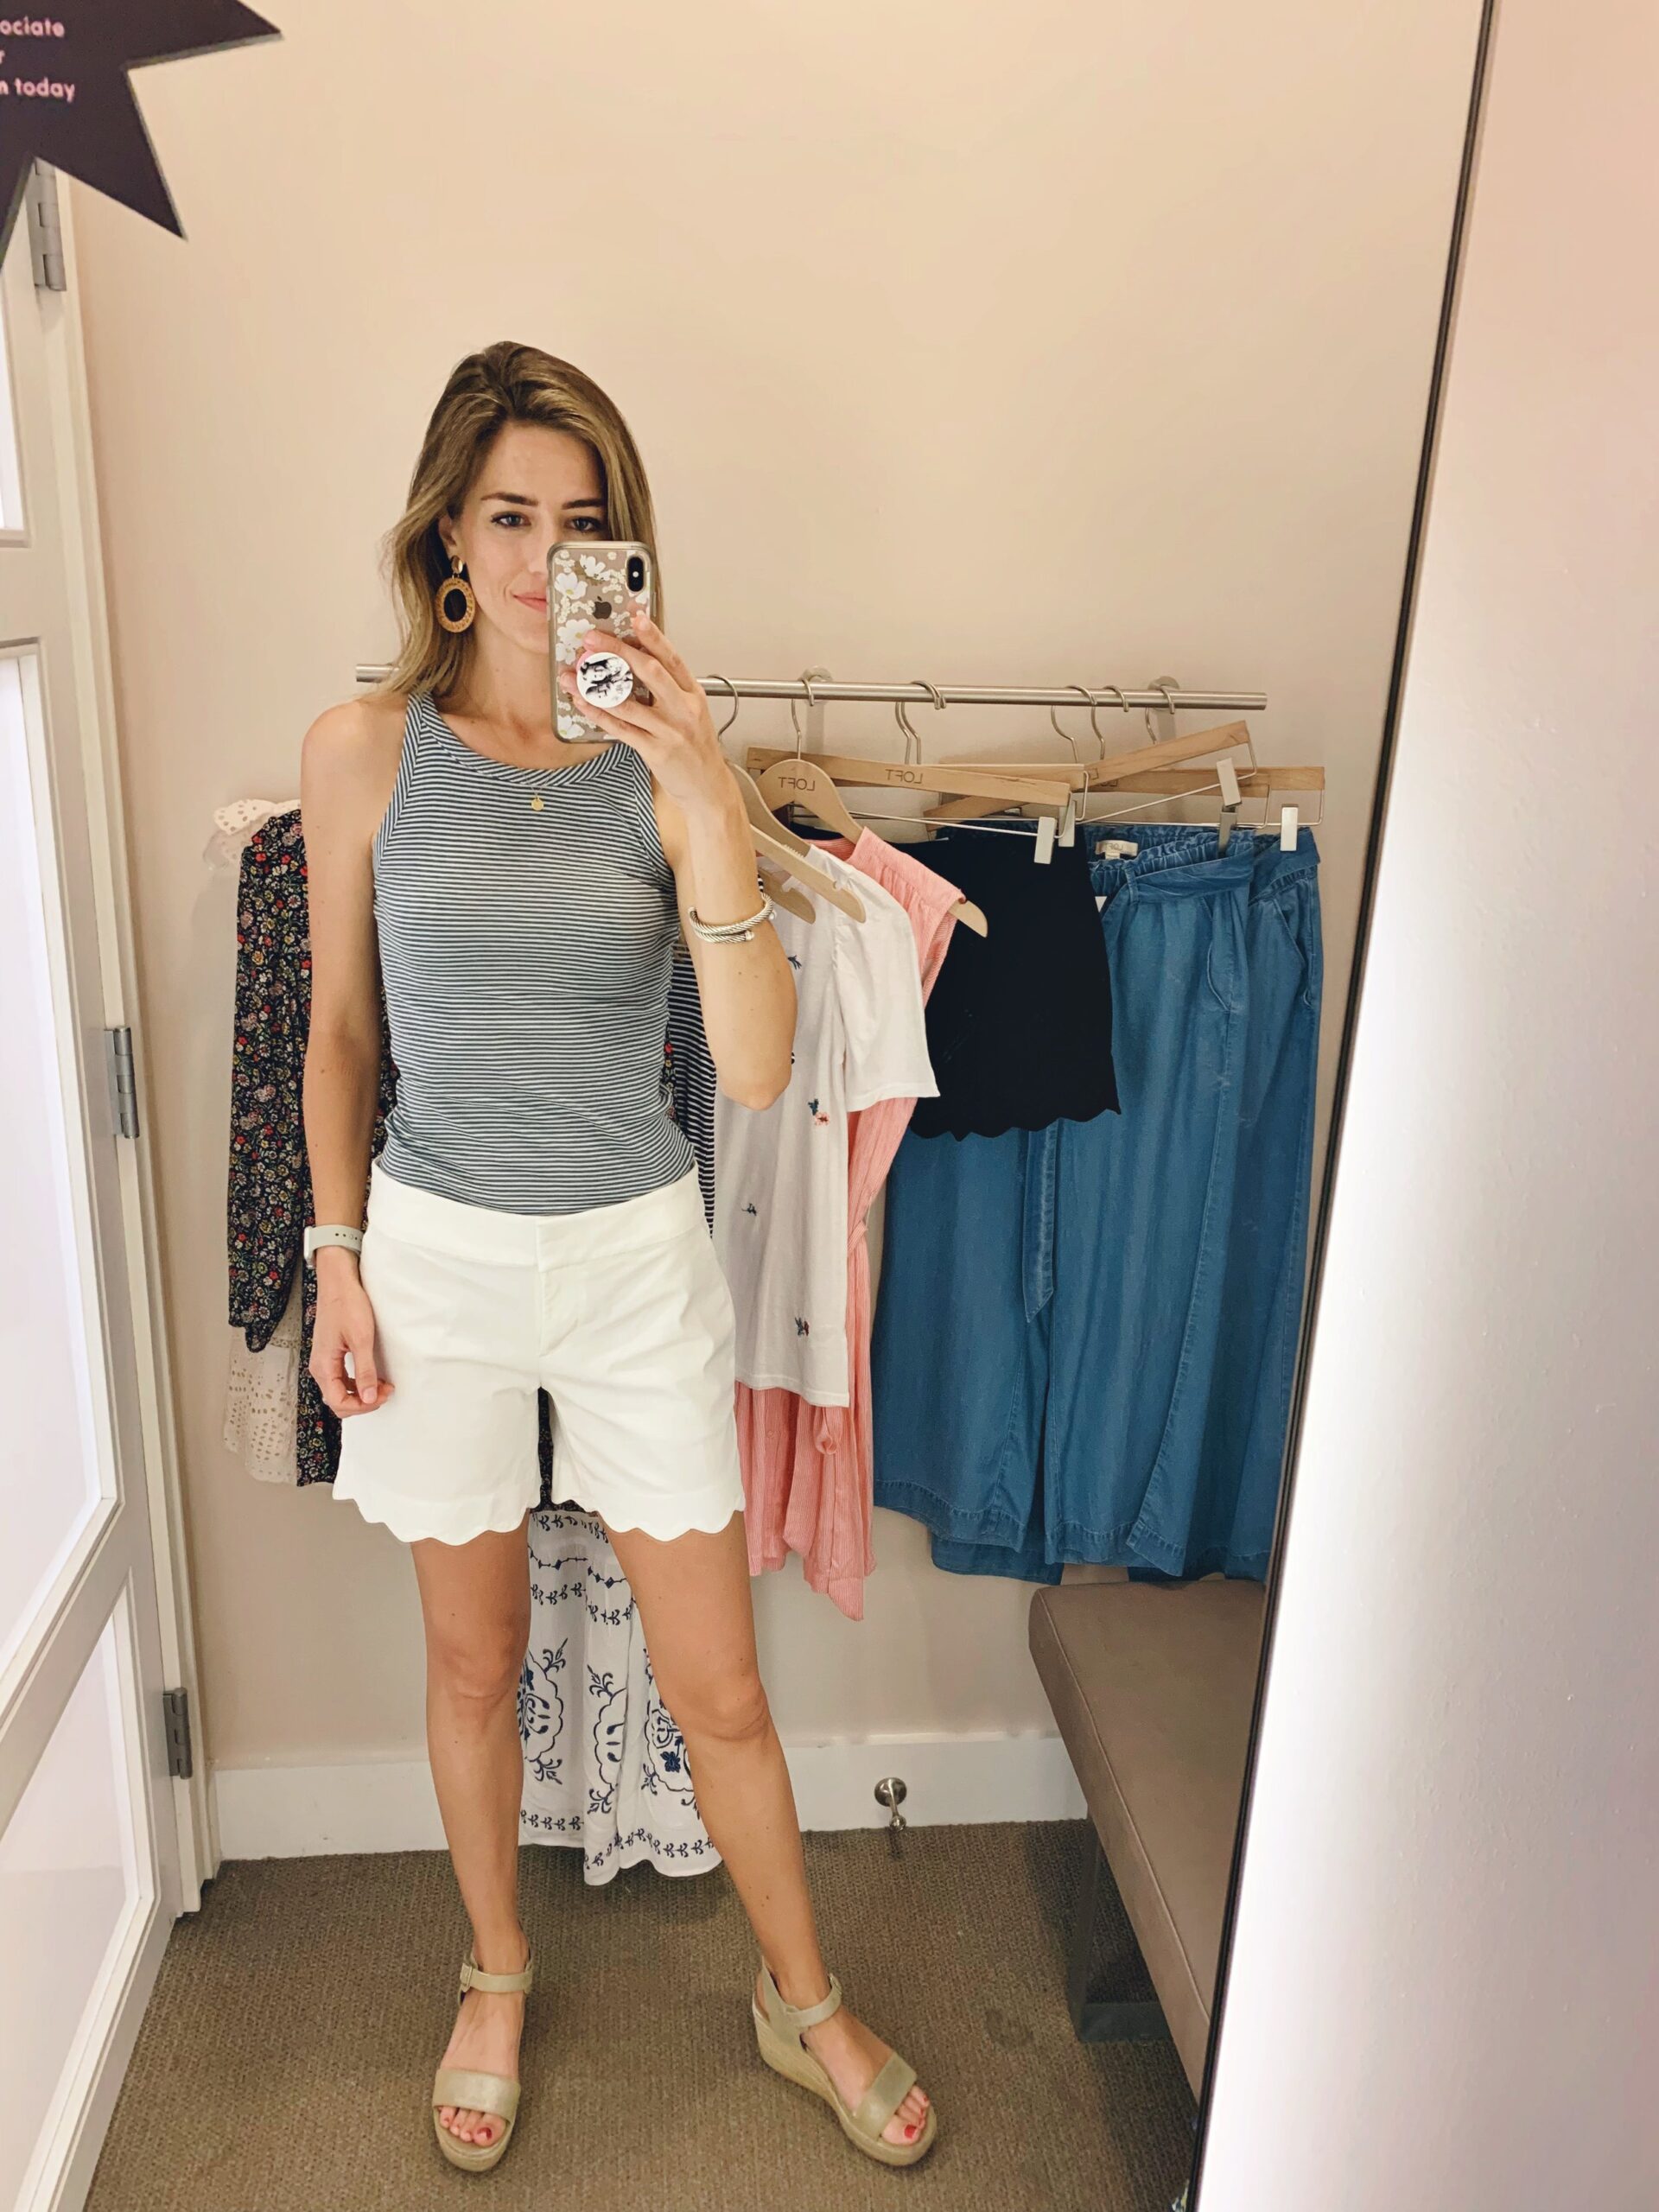 These are the 6” inseam version of the black shorts. They didn’t have my size so they were a little big in the waist but I appreciated the extra length. I REALLY loved this top. Super comfy and the neckline is flattering. Shorts are very limited in …